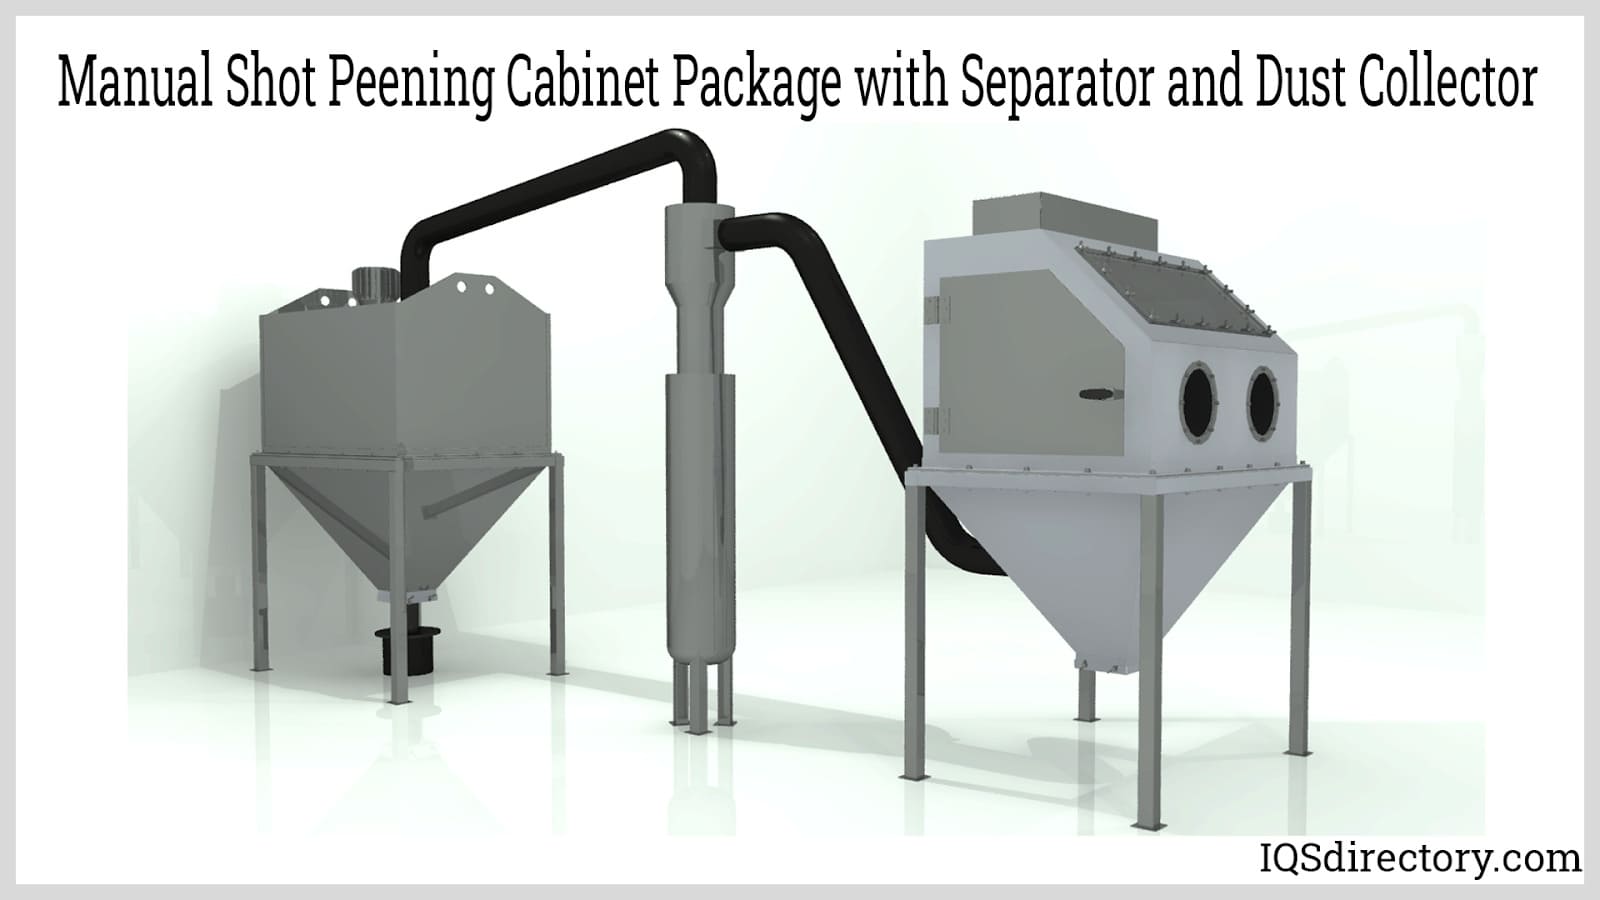 Manual Shot Peening Cabinet Package with Separator and Dust Collector